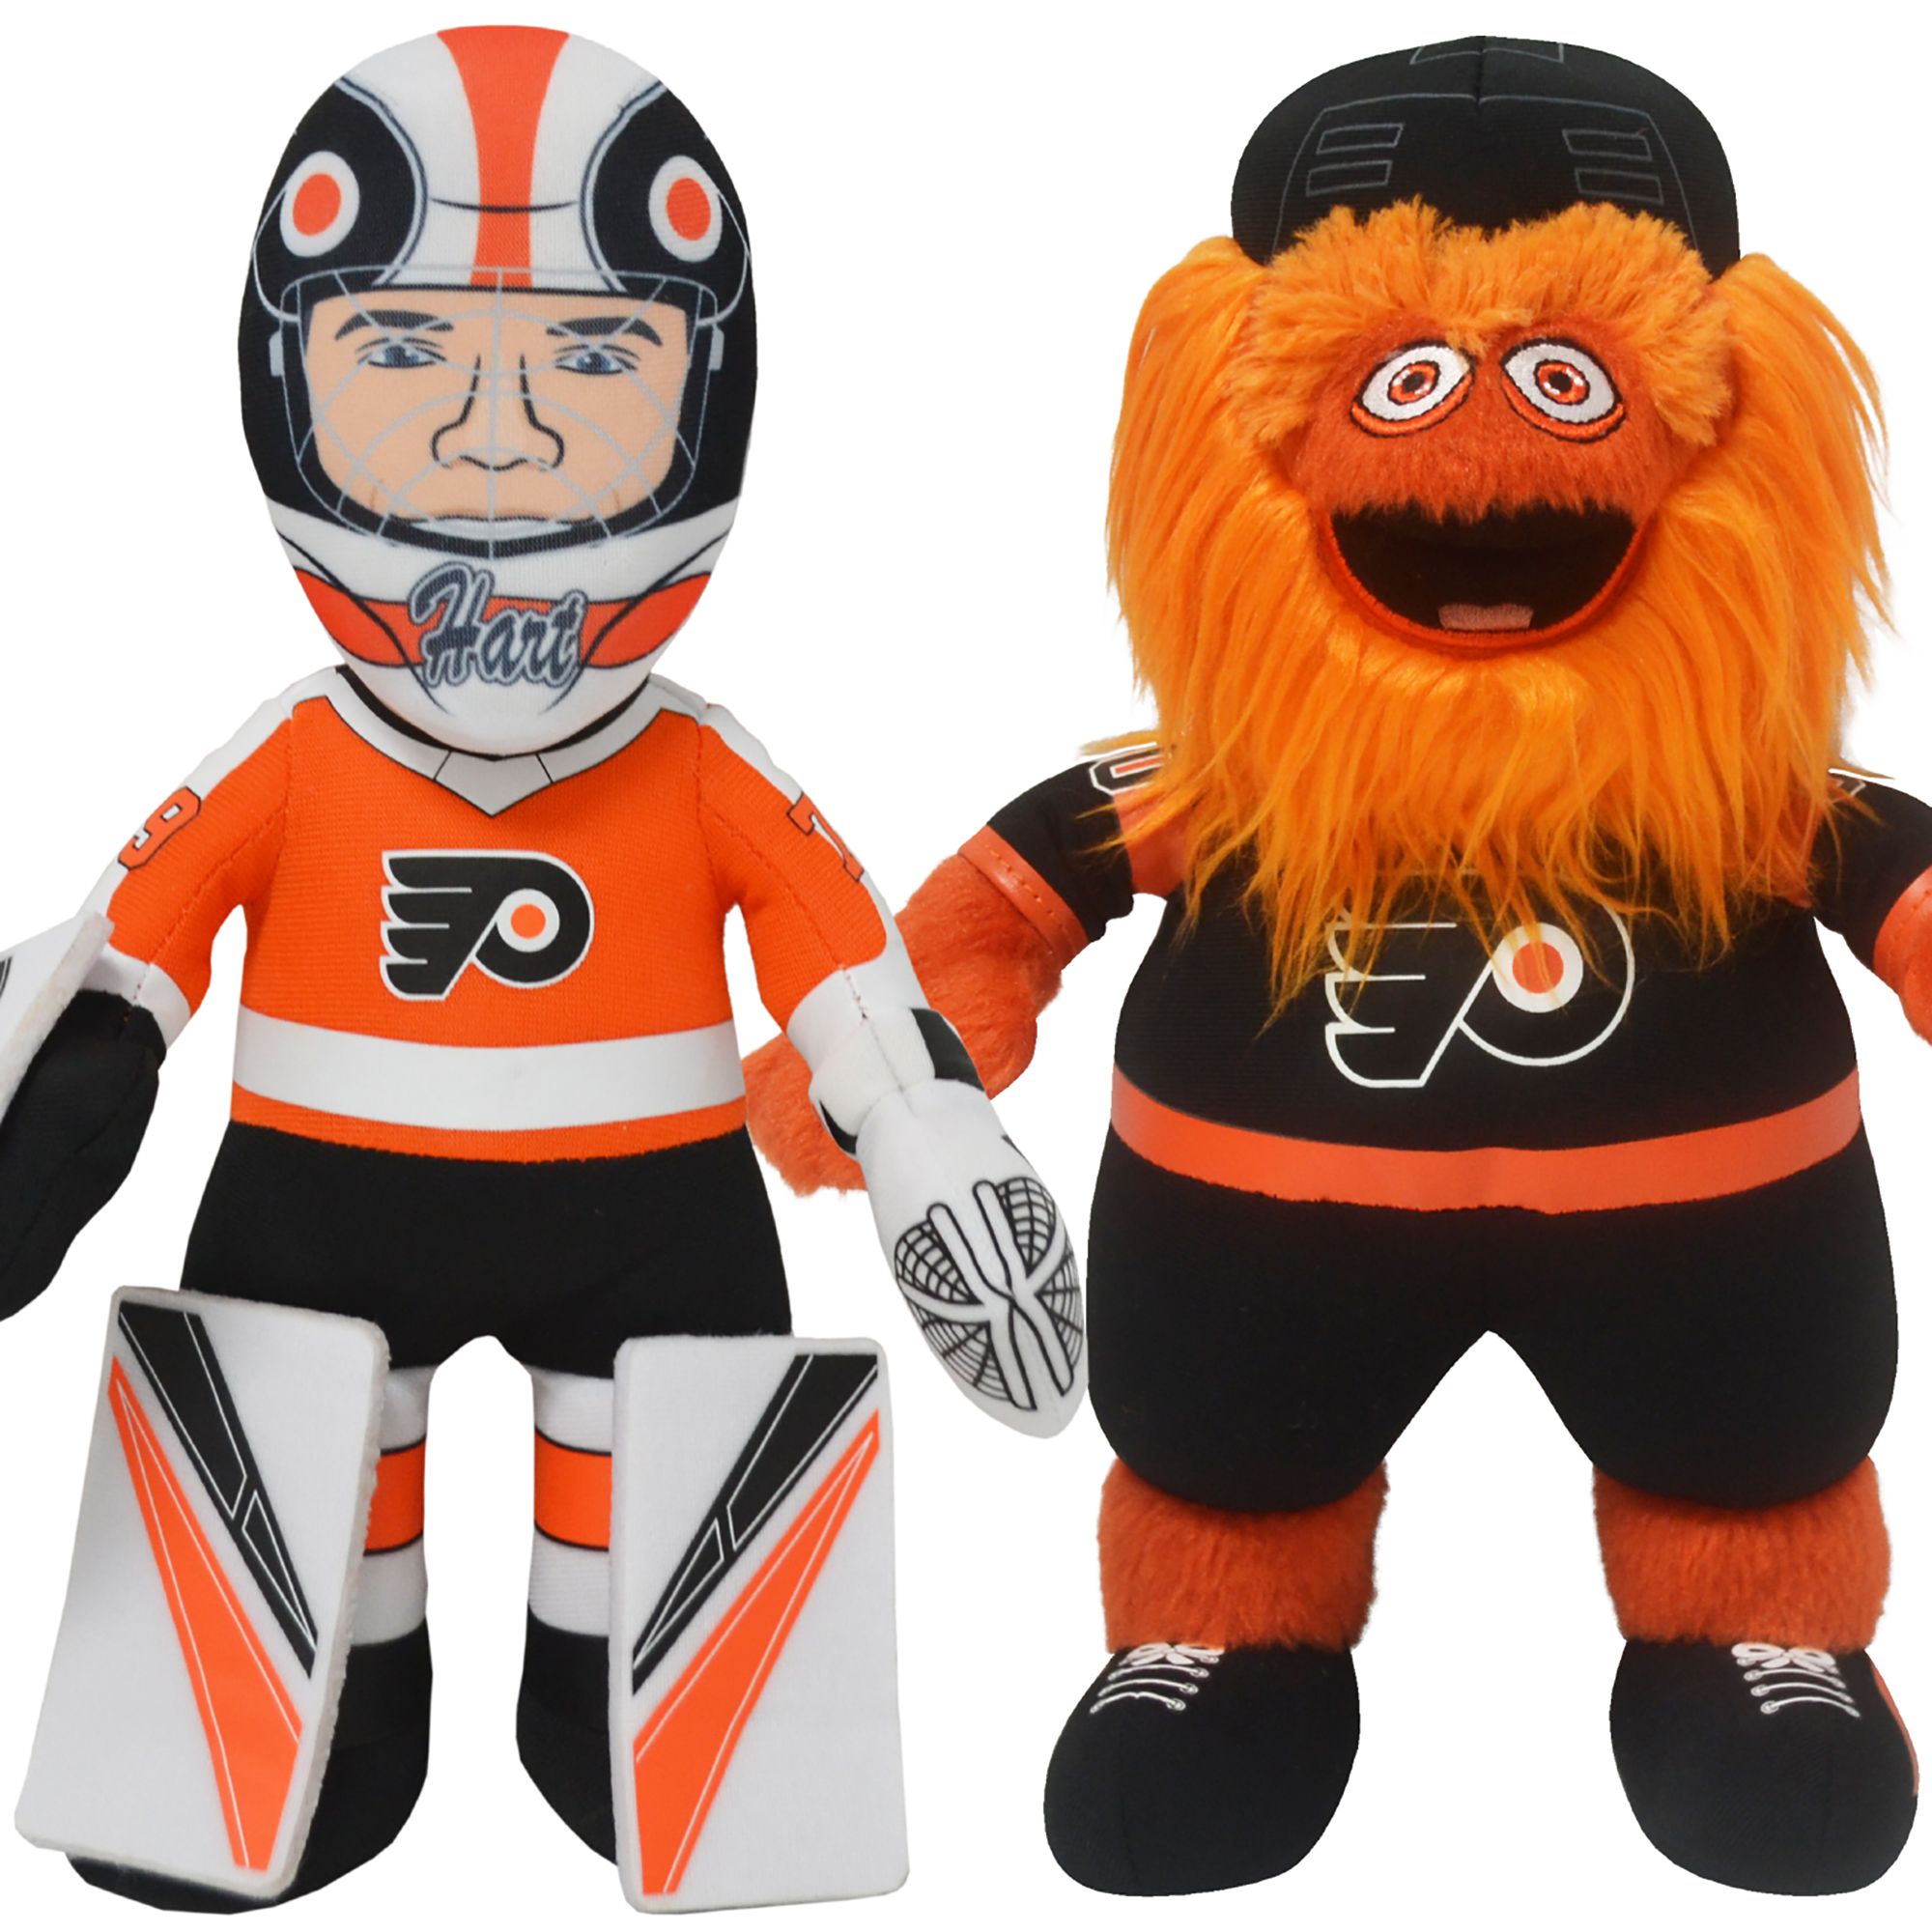  Bleacher Creatures Philadelphia Flyers Gritty 10 NHL Mascot  Plush Figure - A Mascot for Play or Display : Sports & Outdoors